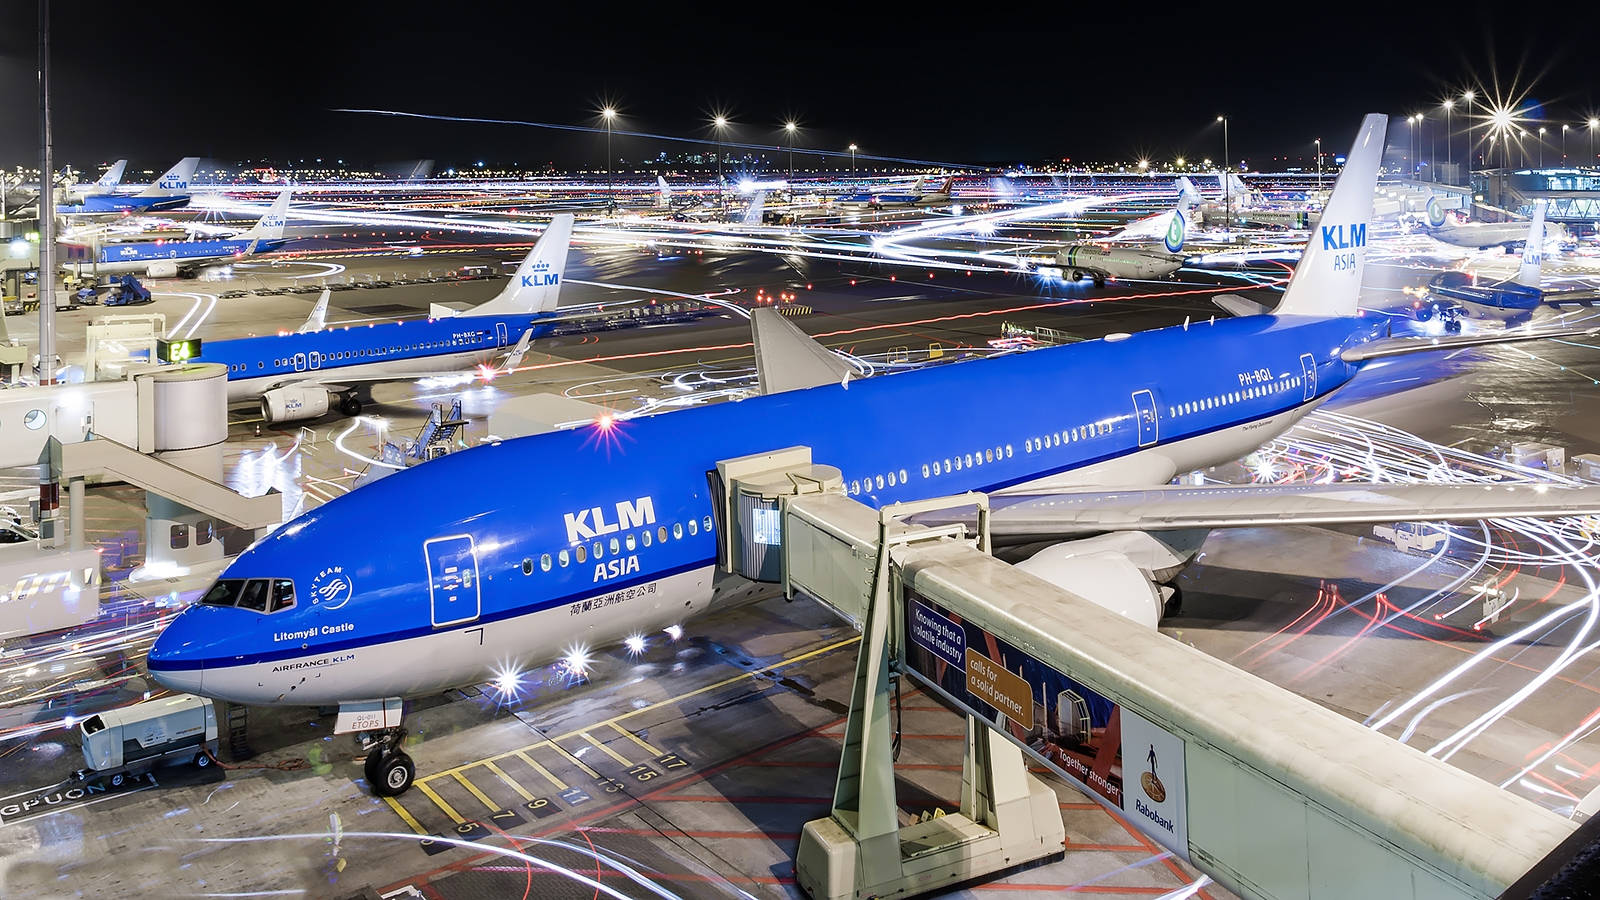 Long Exposure Photography Of Klm Planes Picture